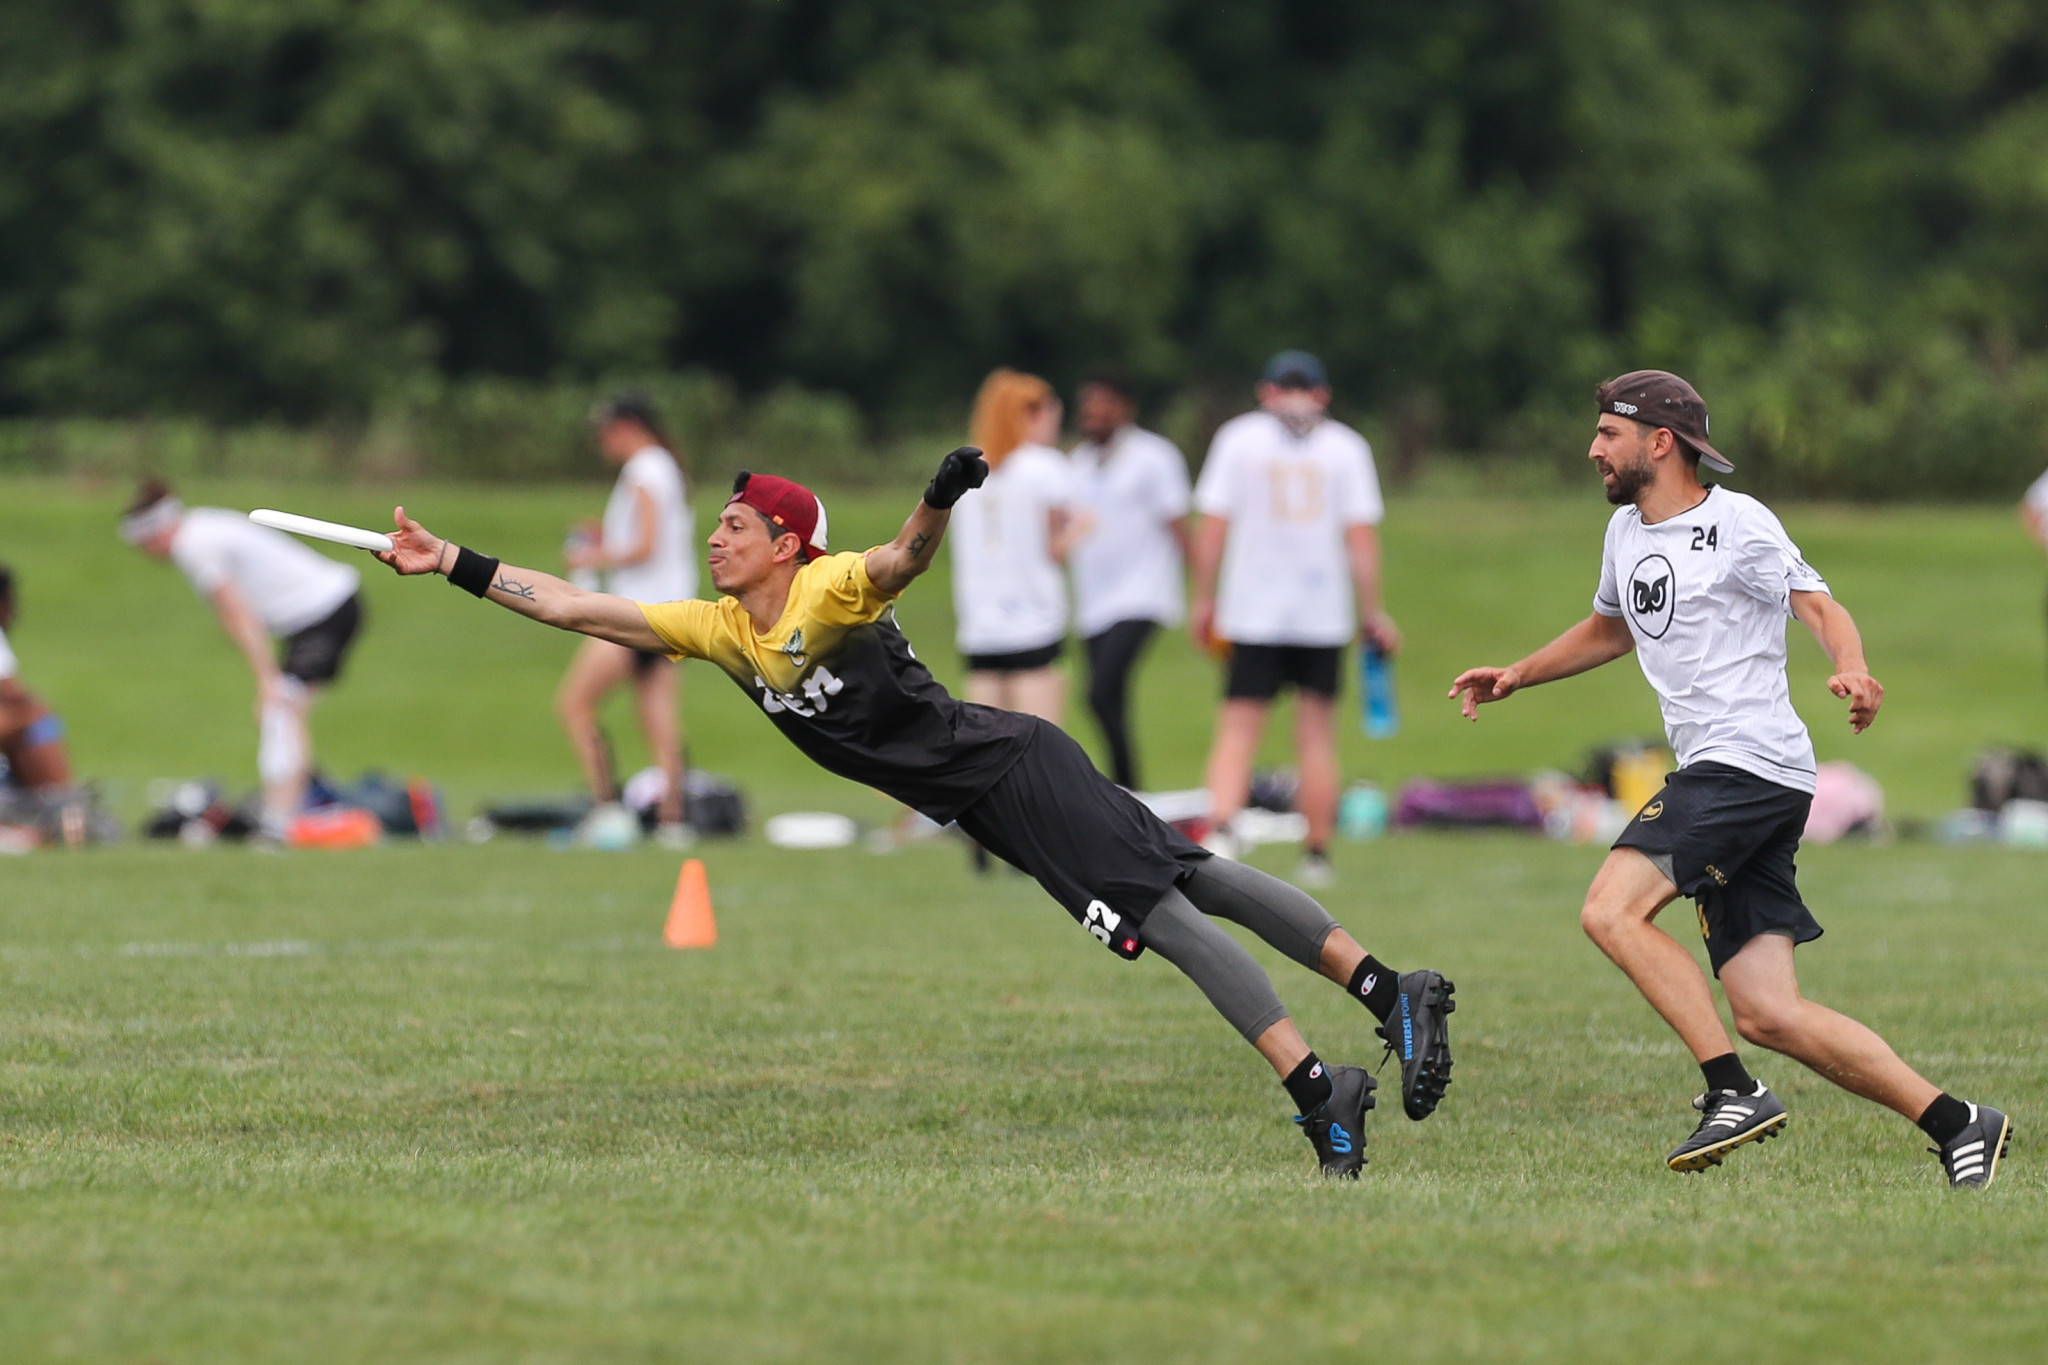 Zen Ultimate Club were unable to better Owls UC in a mixed pool tie in Pool F ©Paul Rutherford for UltiPhotos